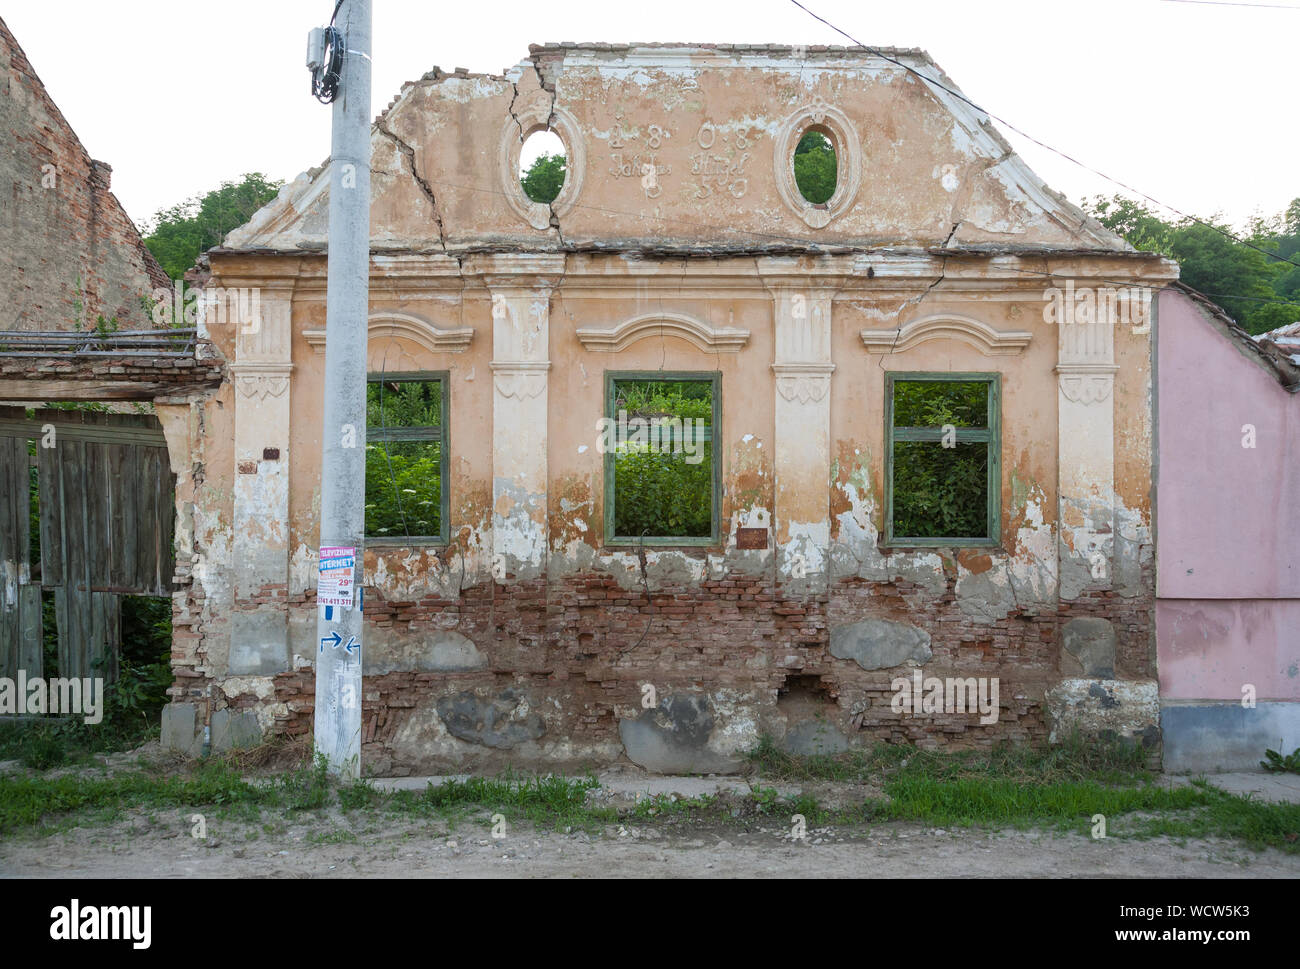 The decaying facade of an early 1800s house in the village of Richis, Transylvania, Romania Stock Photo